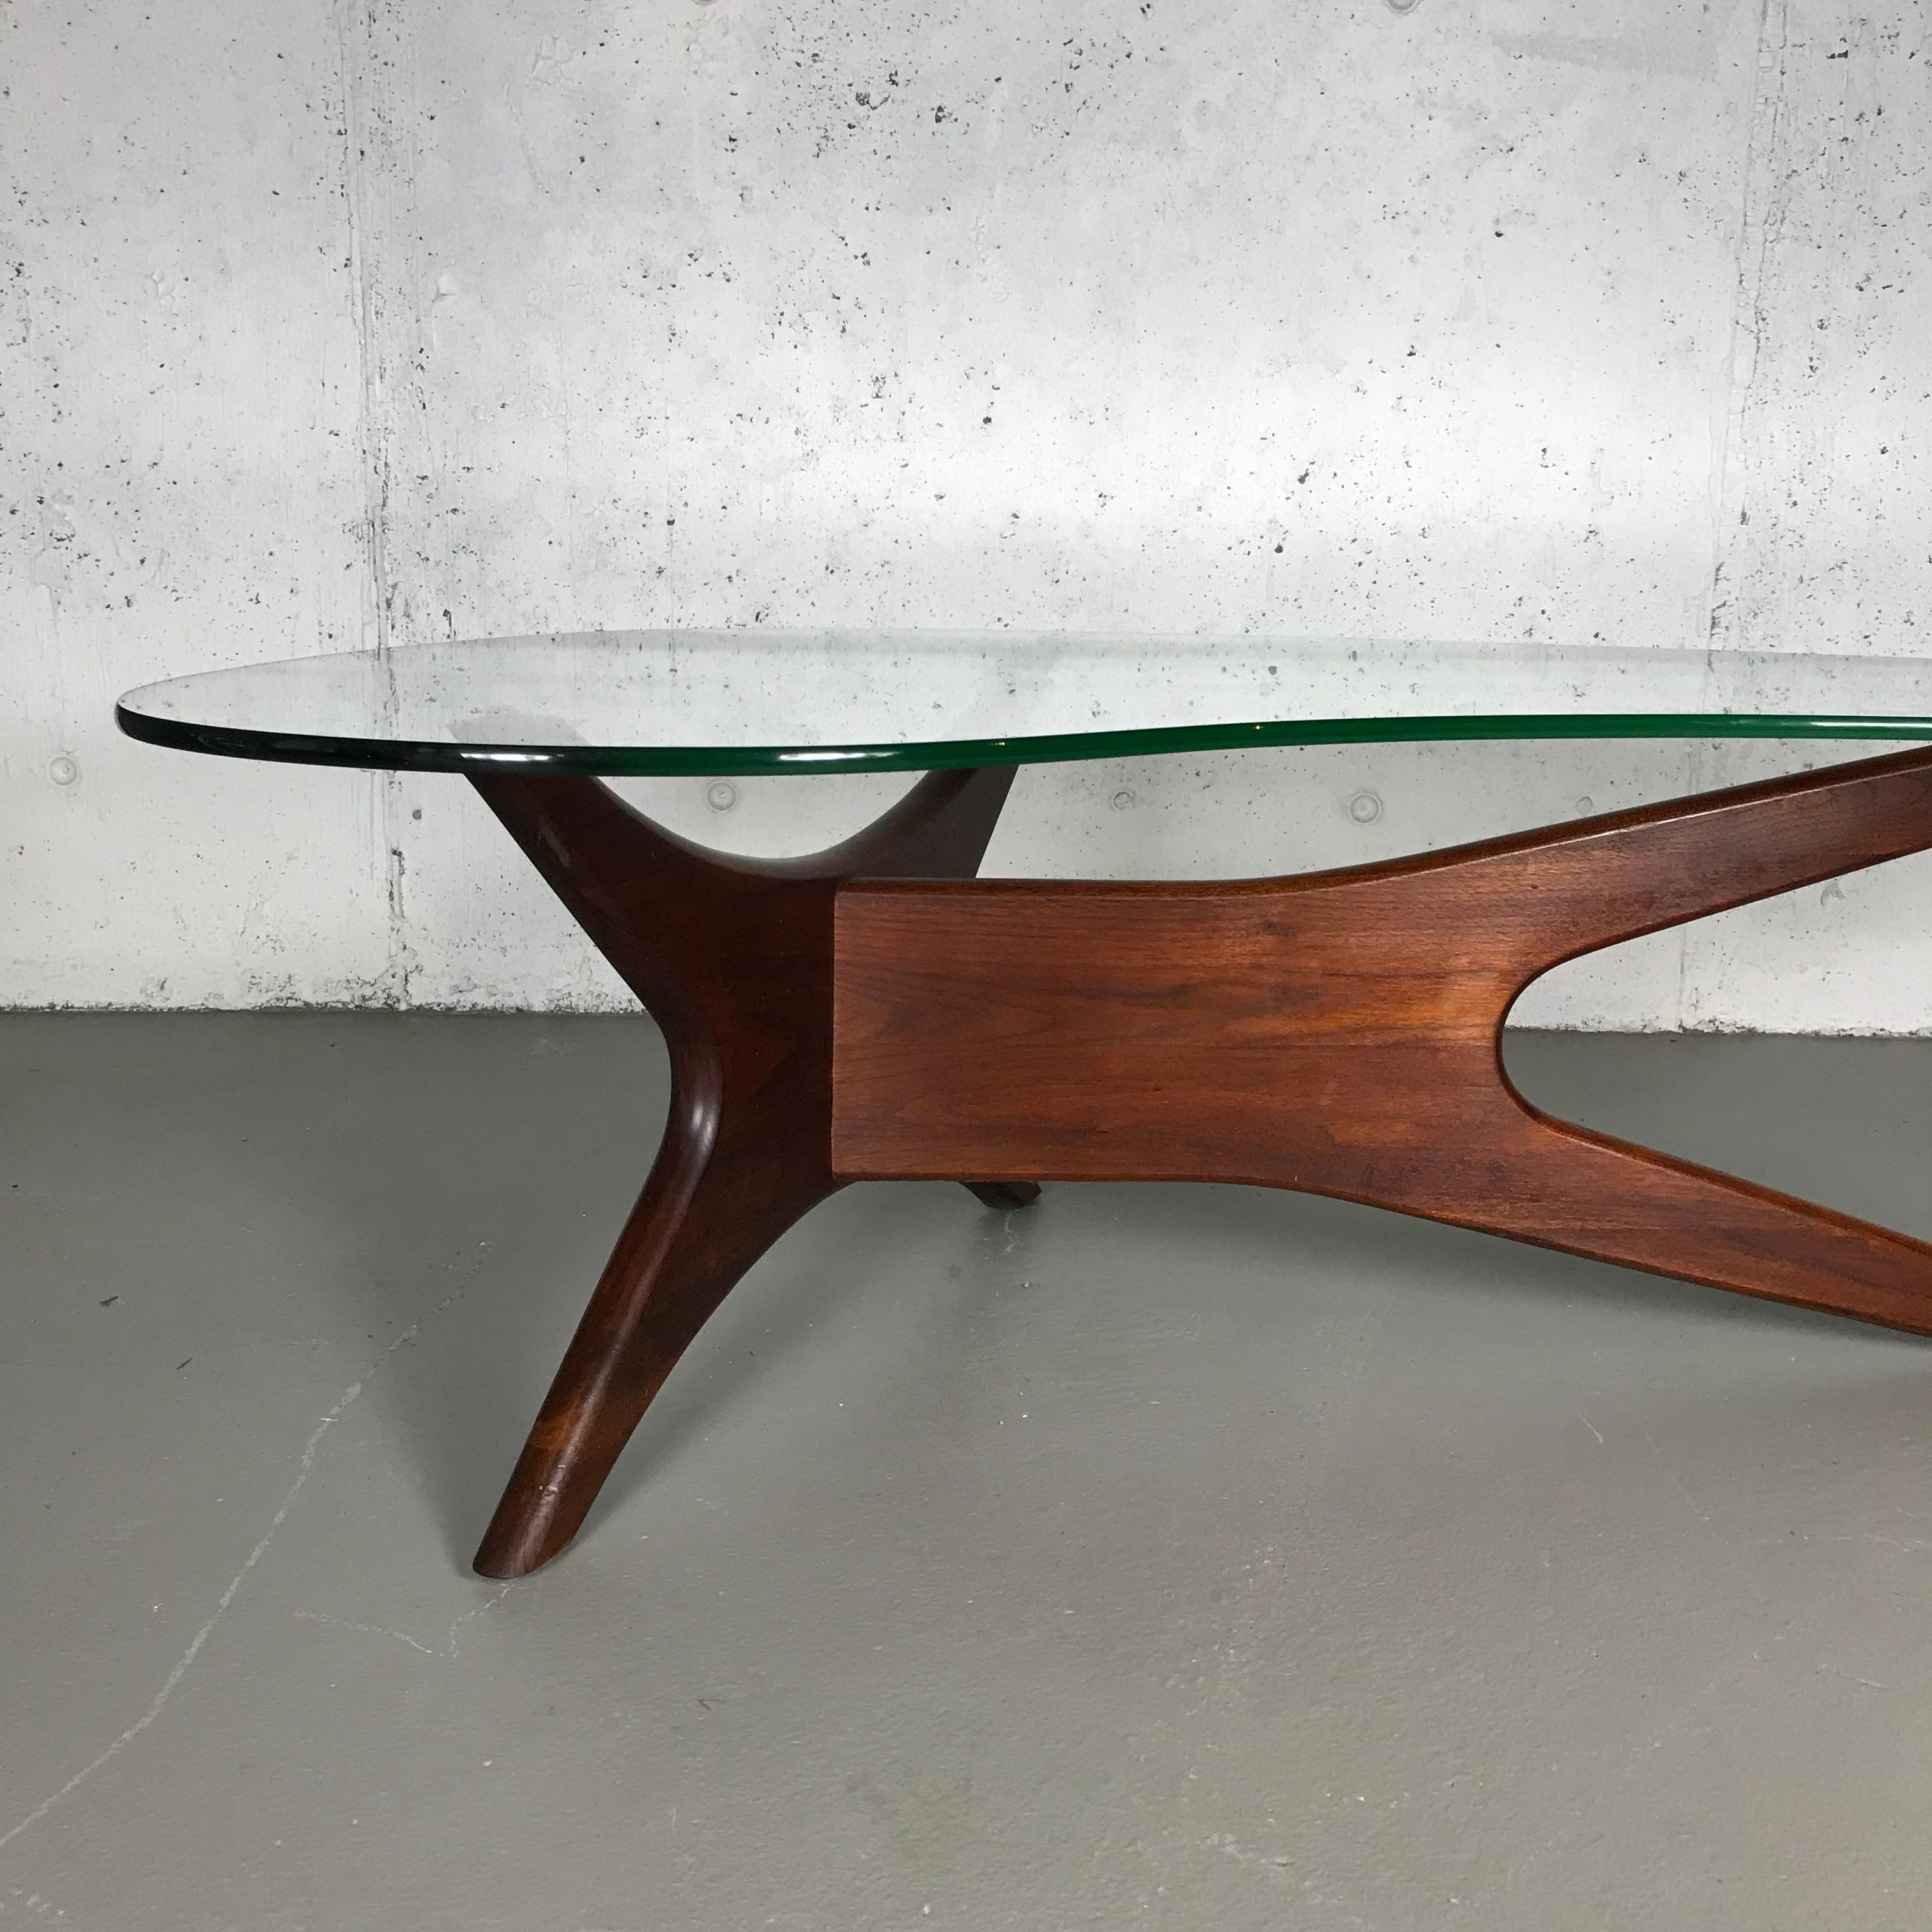 Beautiful sculptural walnut and amoeba shaped glass coffee table by Adrian Pearsall for Craft Associates, 1960s. The table is in very nice original condition with some hard-to-see abrasions to the legs and a few scratches on the glass. Small cluster